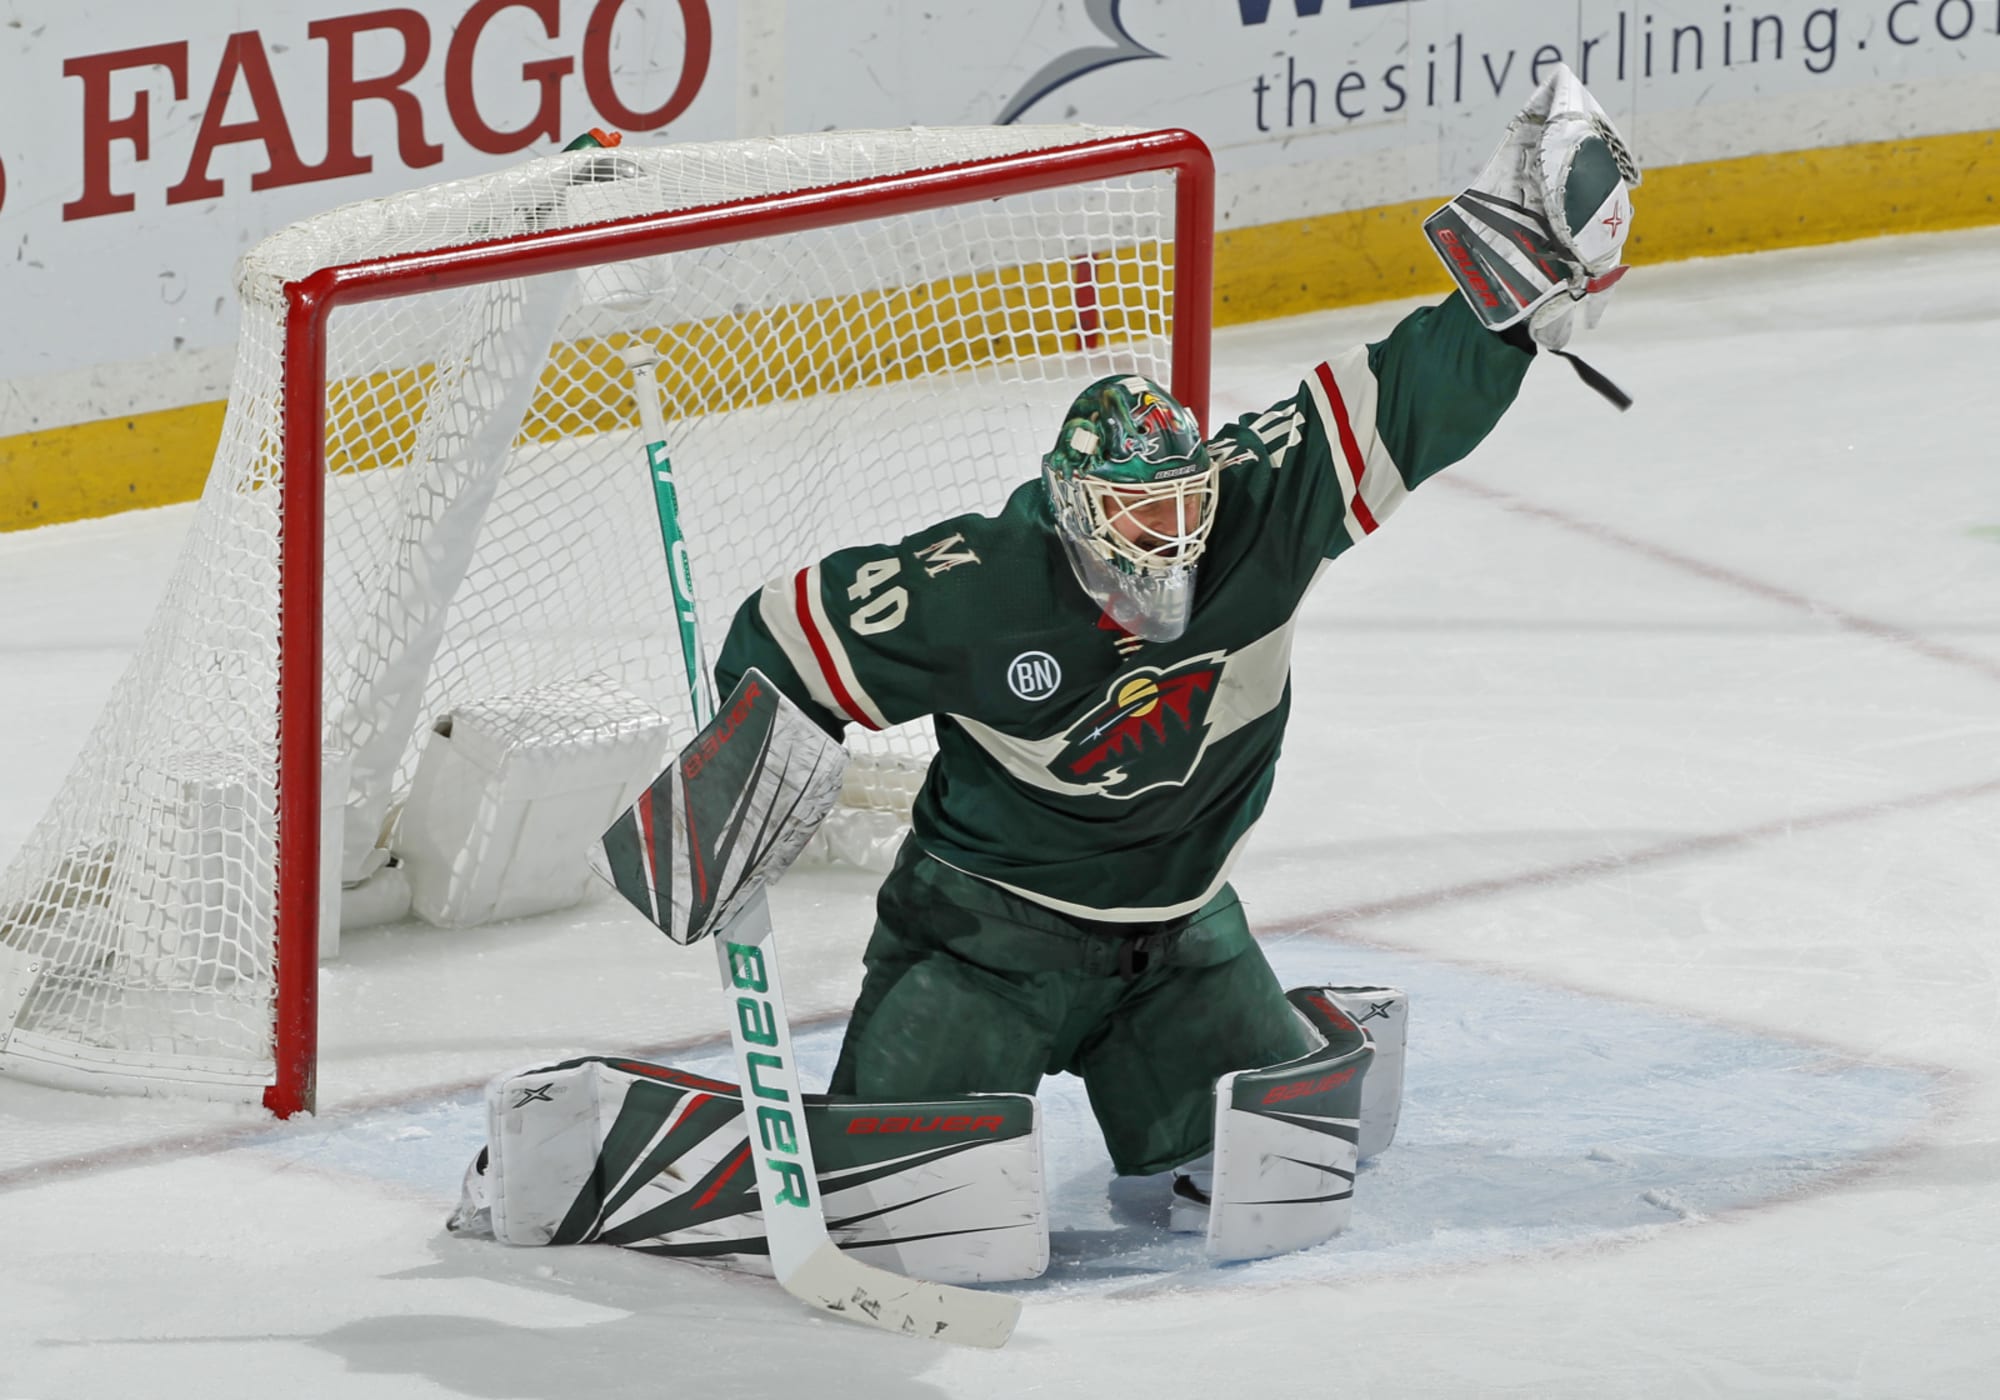 Wild goalie Devan Dubnyk takes time to deal with wife's medical condition